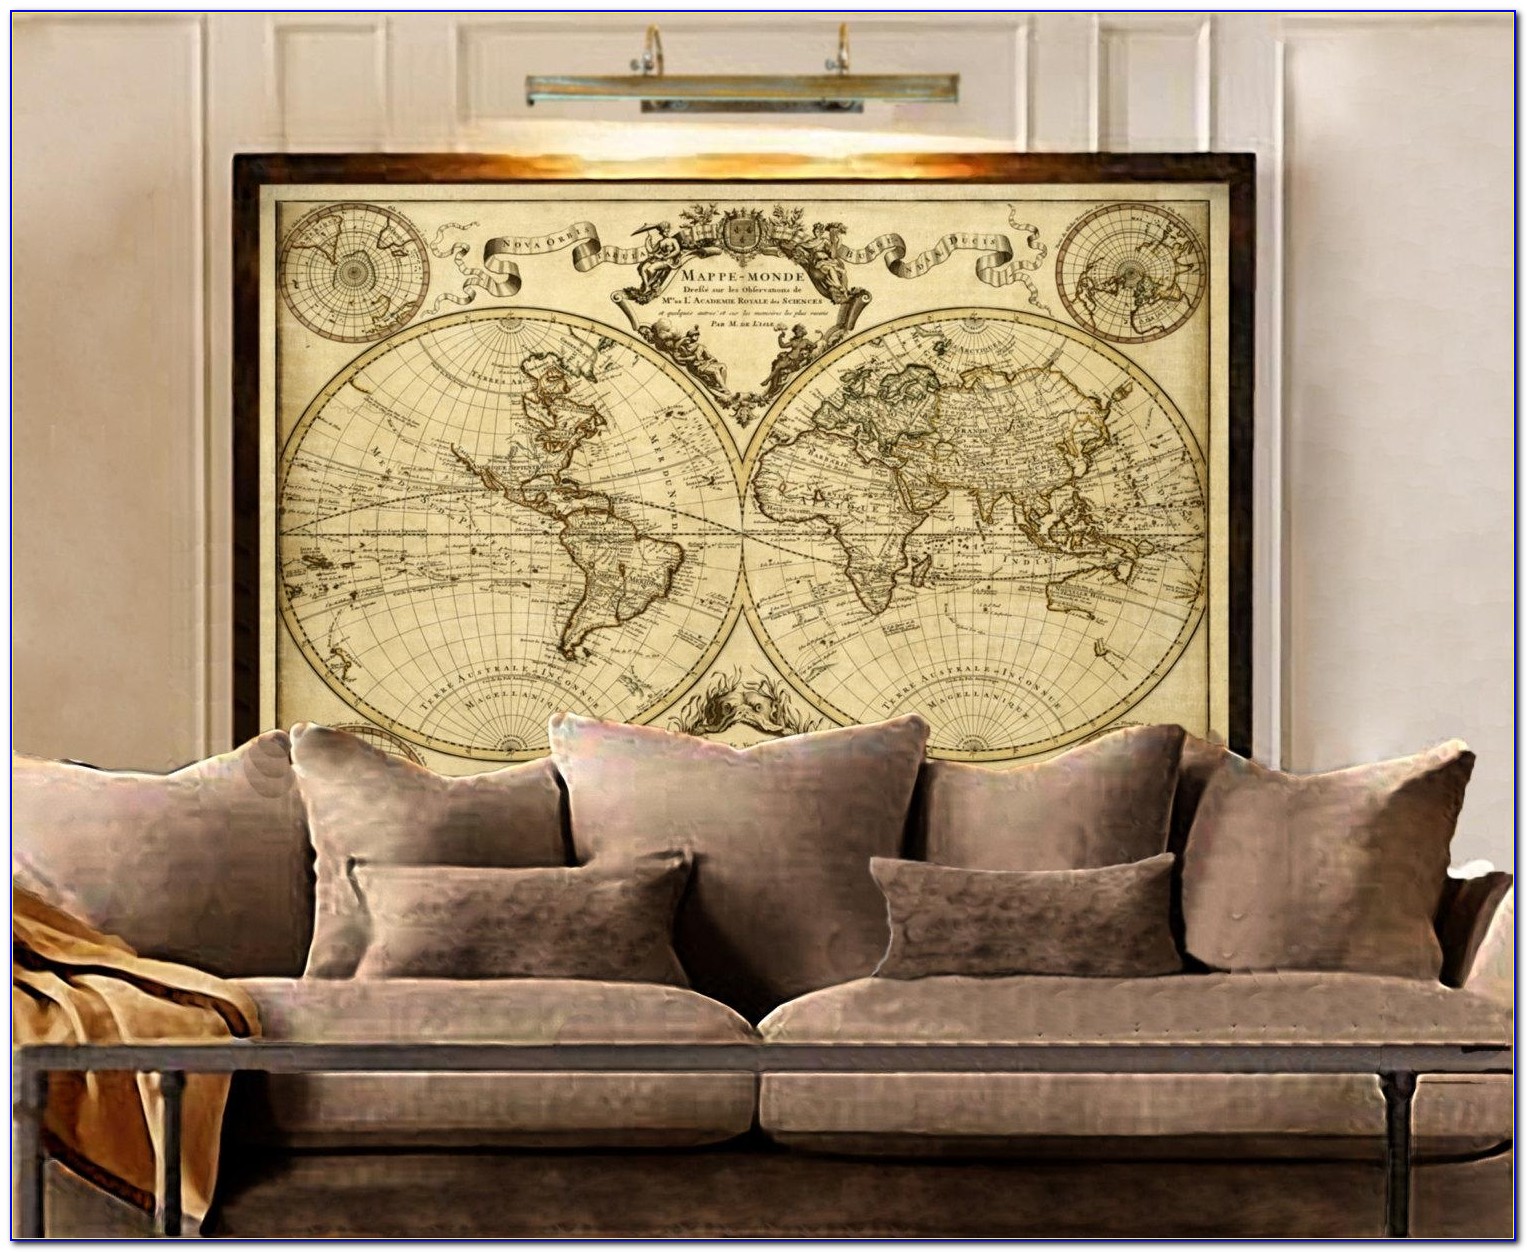 L'isle's 1720 Old World Map Historic Map Antique Style In Framed World Map Wall Art